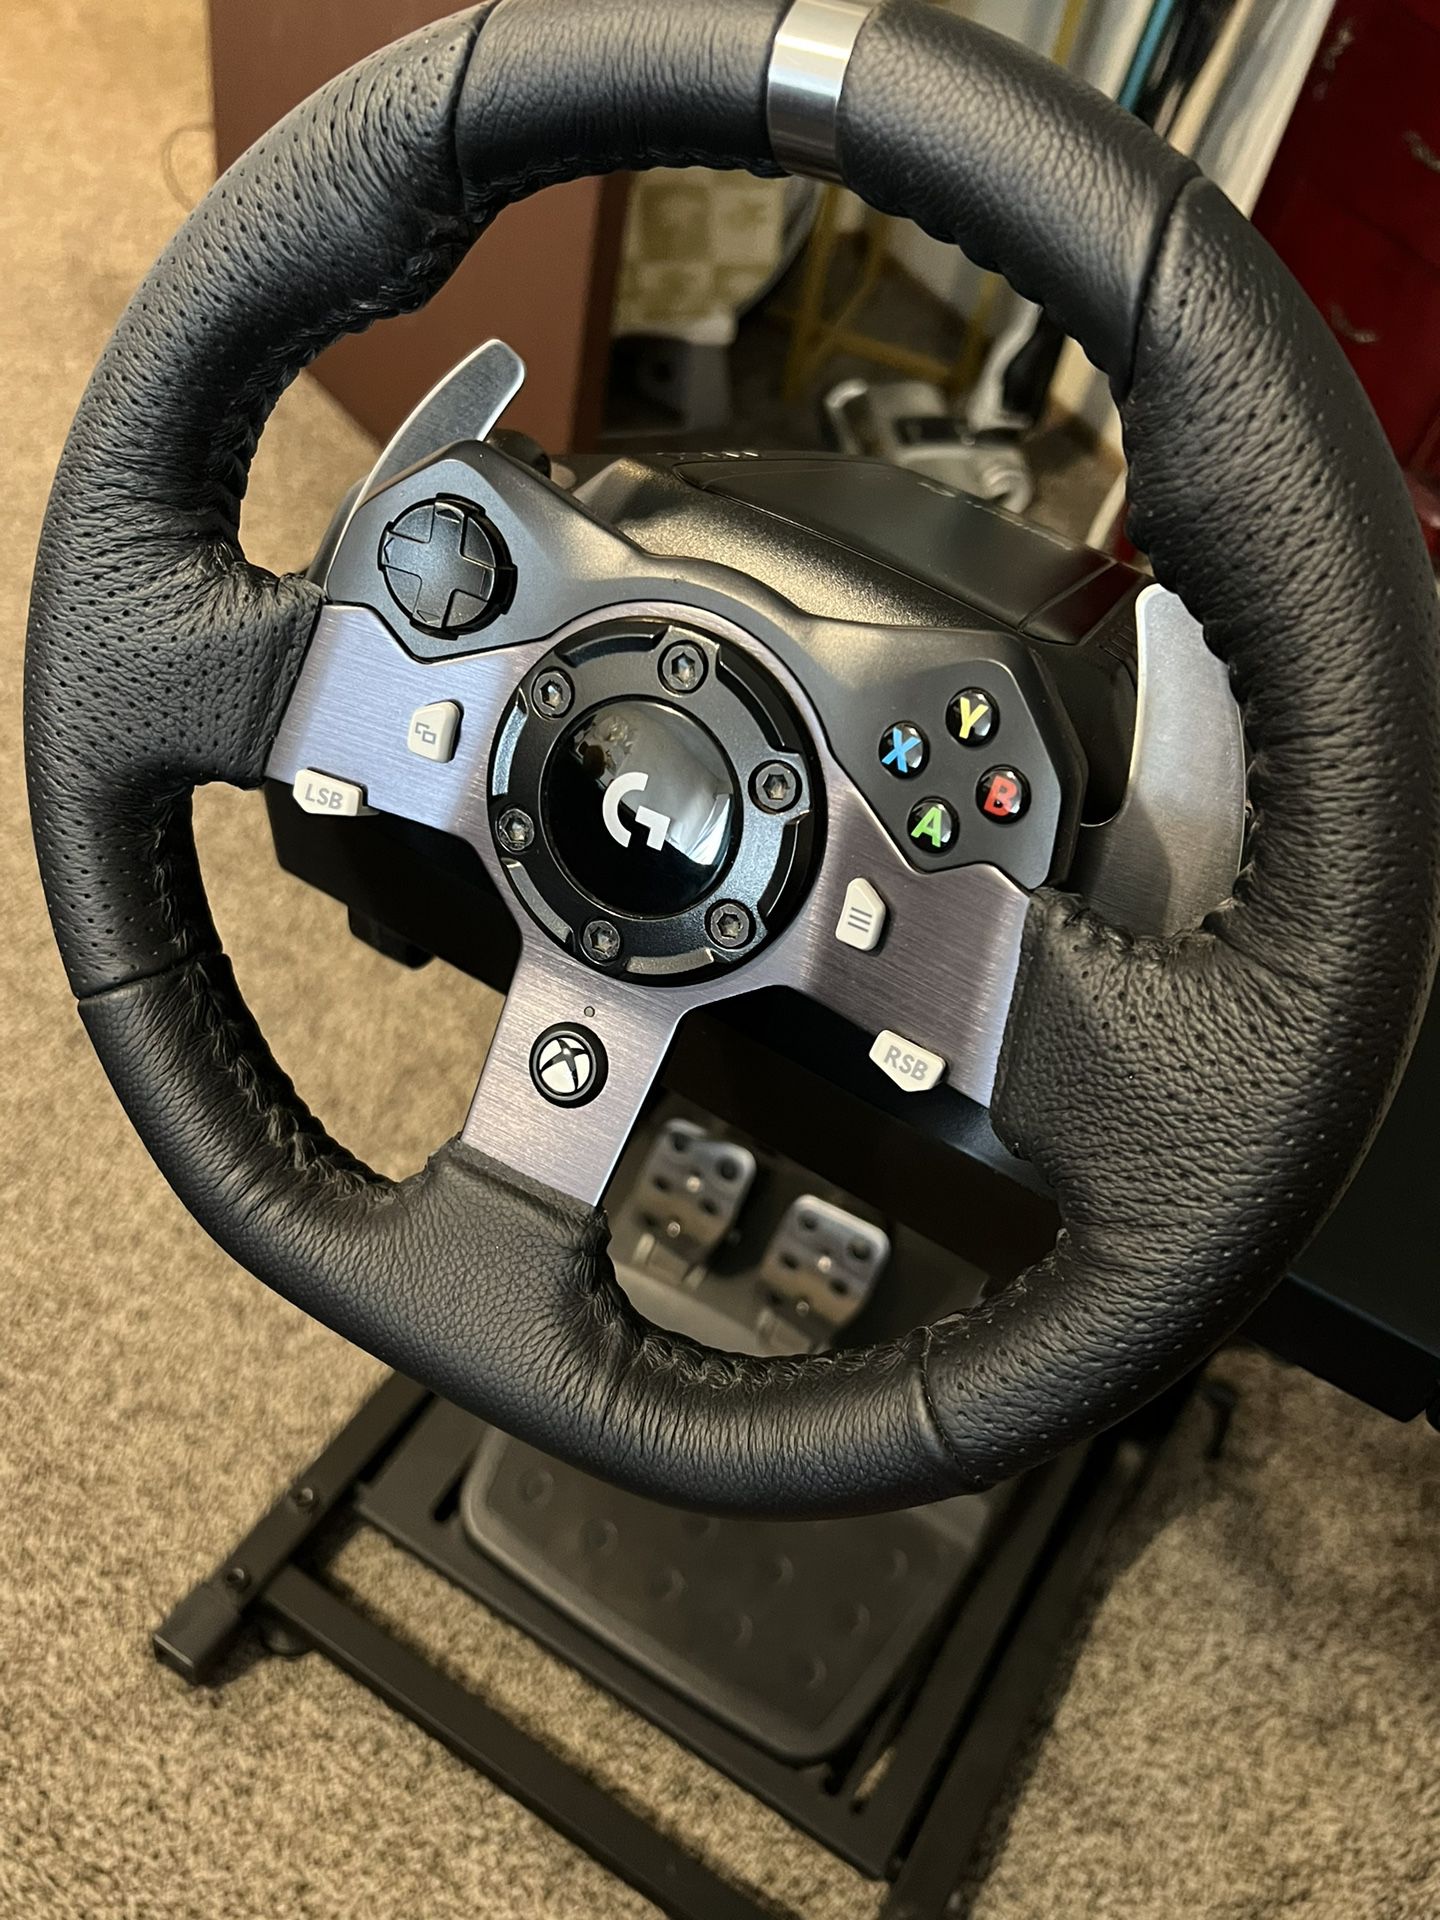 Logitech G920 Driving Force Racing Wheel and Floor Pedals, Real Force Feedback, Stainless Steel Paddle Shifters, Leather Steering Wheel Cover for Xbox